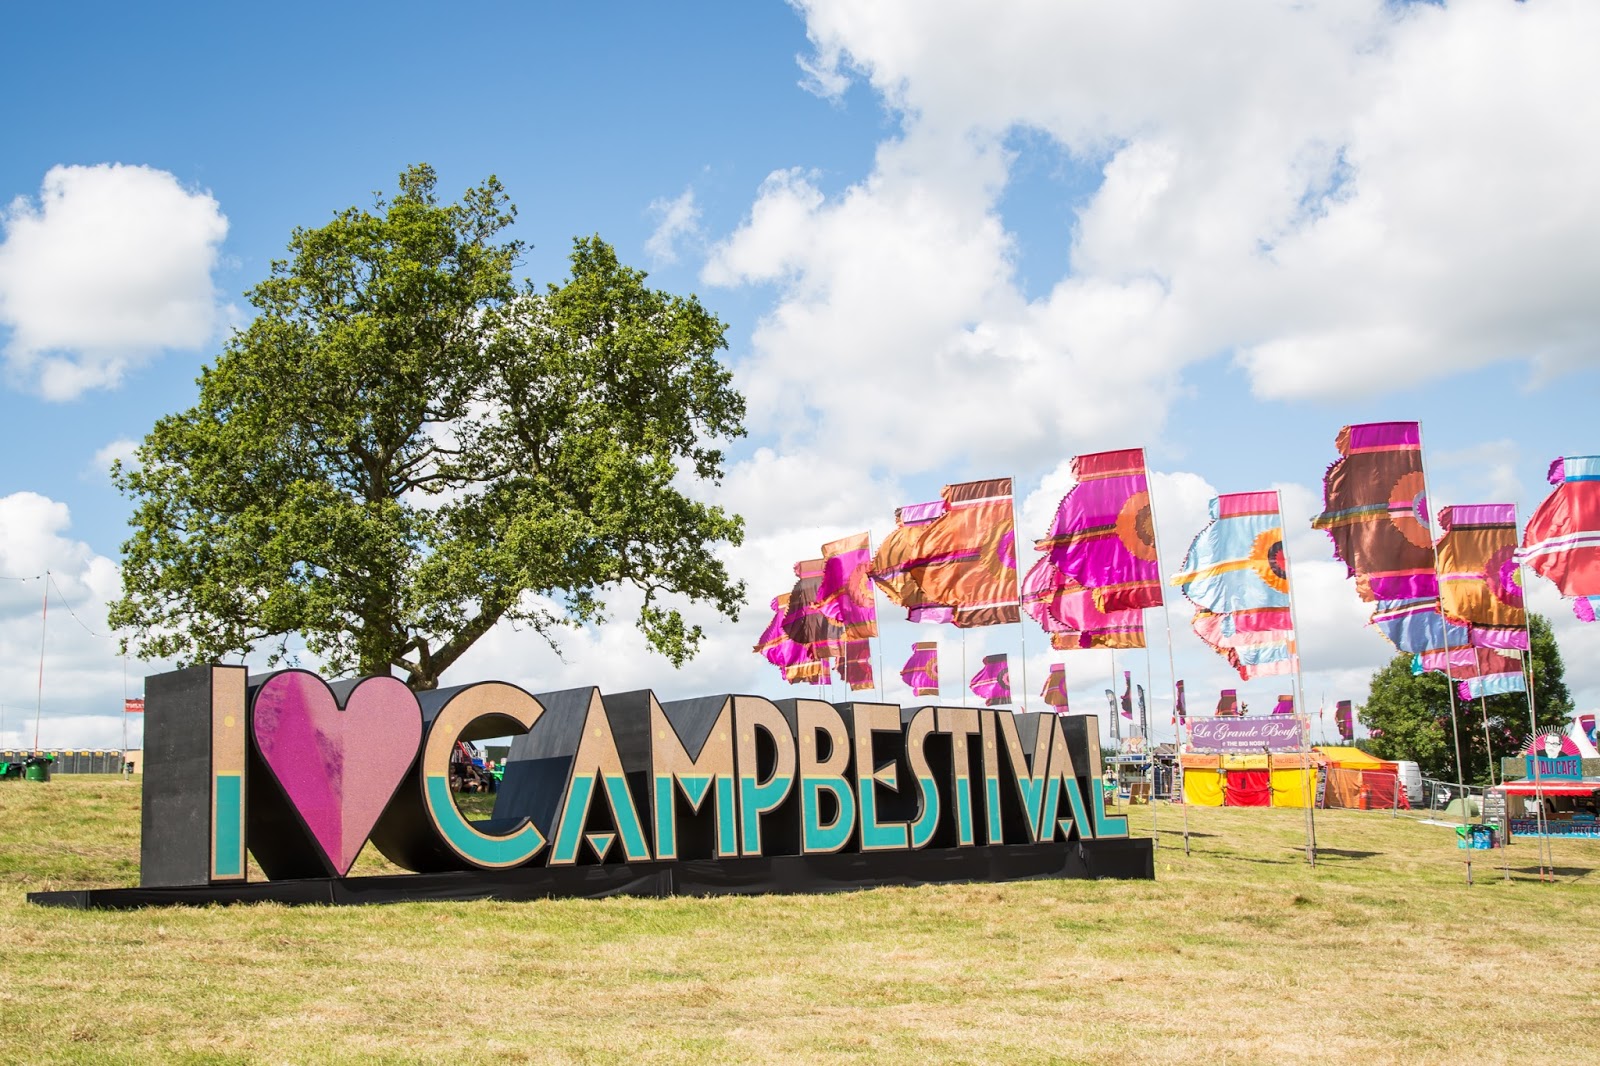 mamasVIB | V. I. BASH: An A-Z of our first Camp Bestival - Part One | camp bestival 2015 | camp bestival review | weekend at camp bestival | festival | family festival | lulworth castle | festival weekend | devon | festival | tangerine fields | cocktails | instgram | a-z | a-z of festivals | festival style | mamasVIB | bonita turner| stylist | packing for a festival | first time at a festival | festival essentials | guide to camp bestival 2015 | camp bestival | 